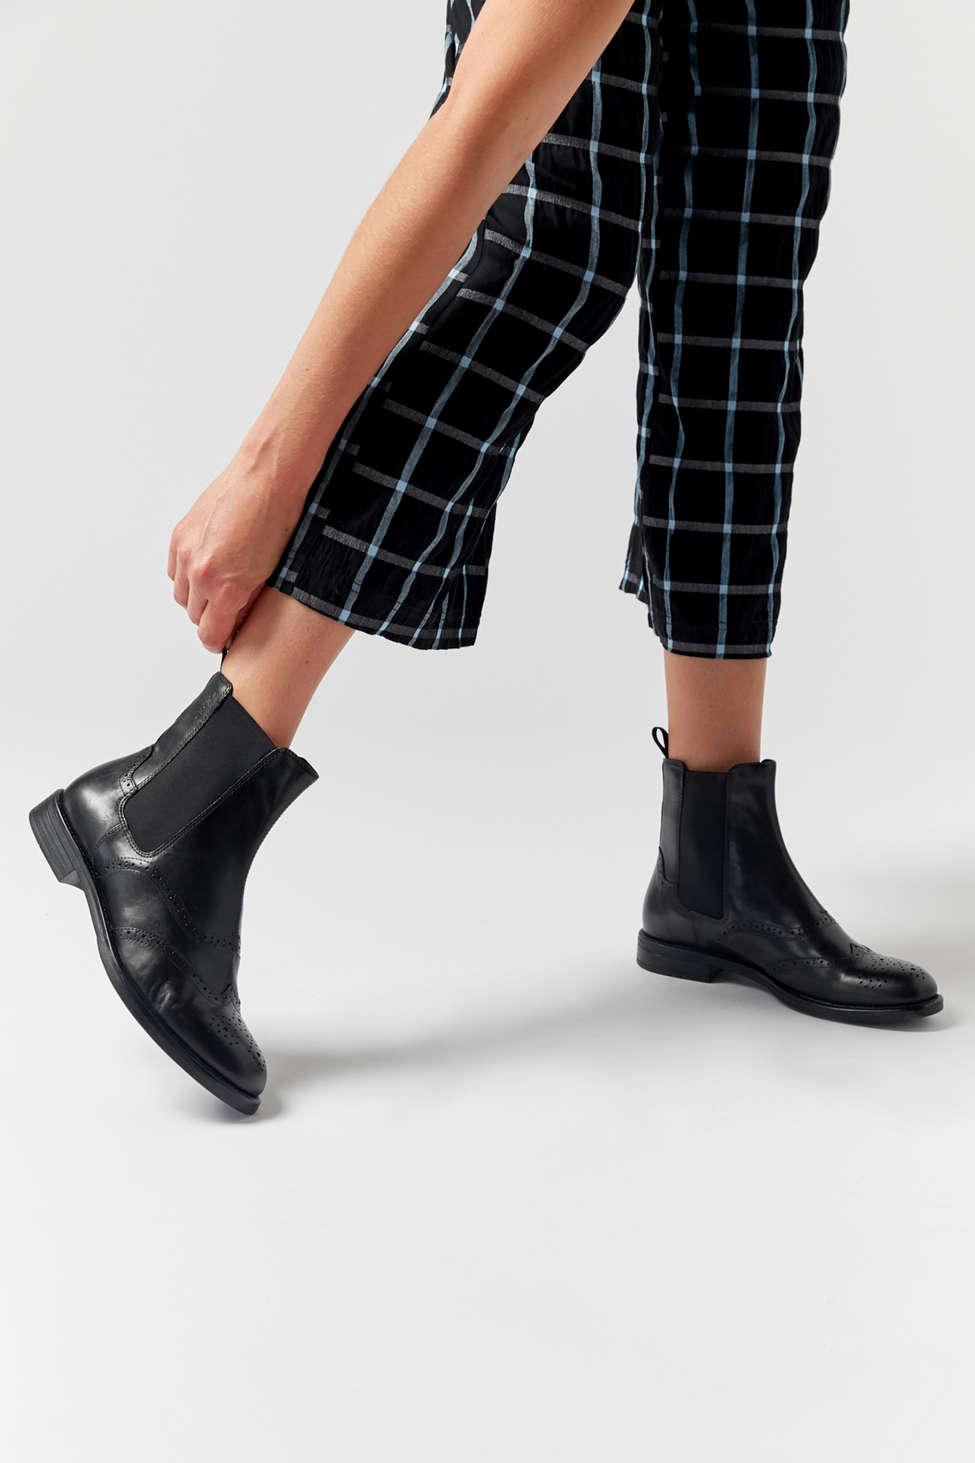 Vagabond Leather Amina Chelsea Boot in Black - Lyst